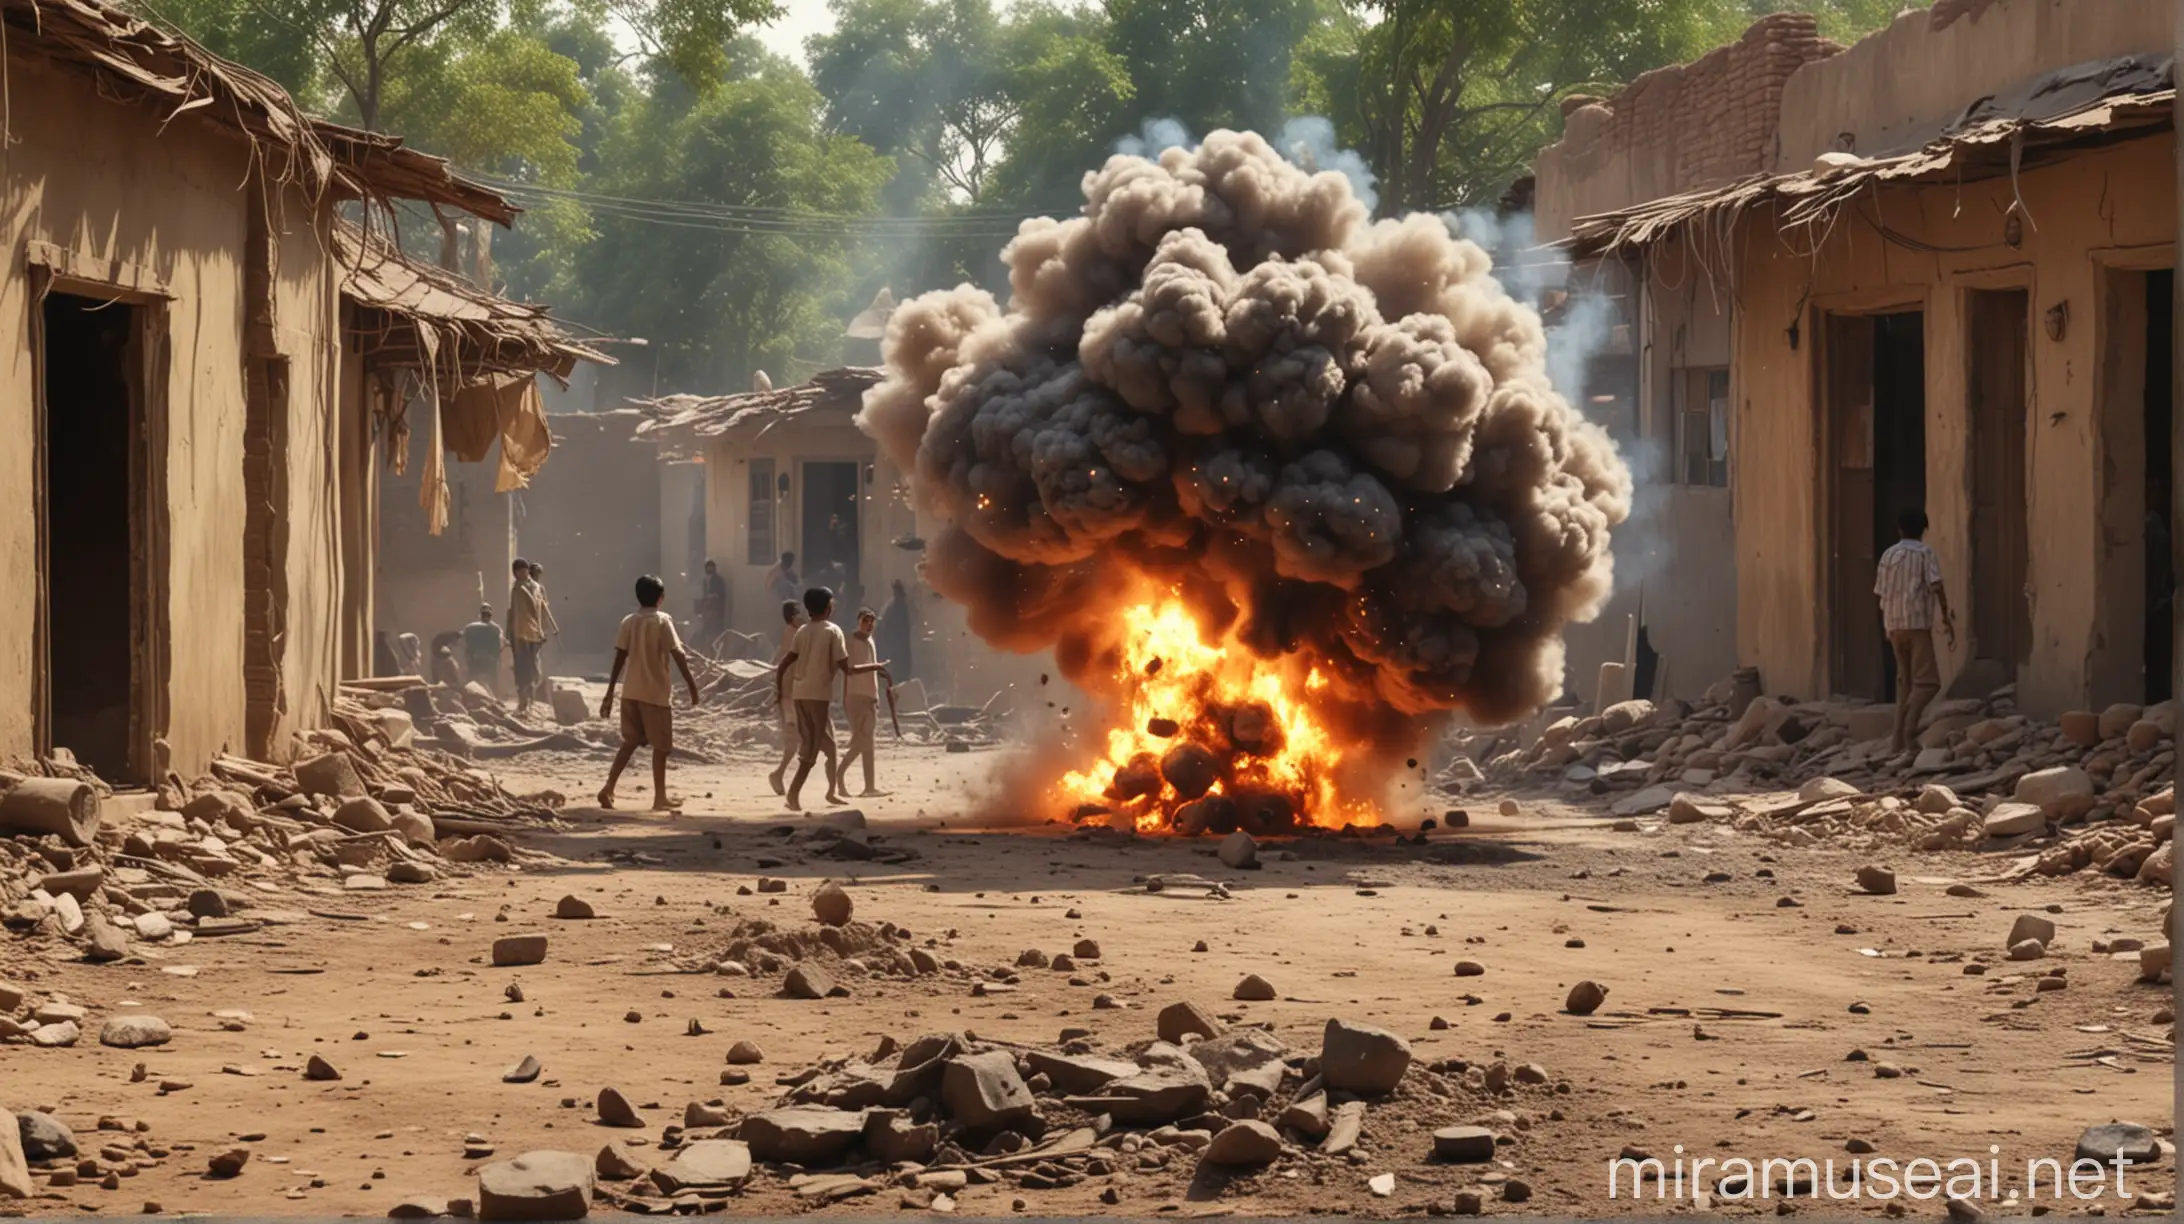 mini bomb explodes in indian village, some kids playing in background, hyper detailed,